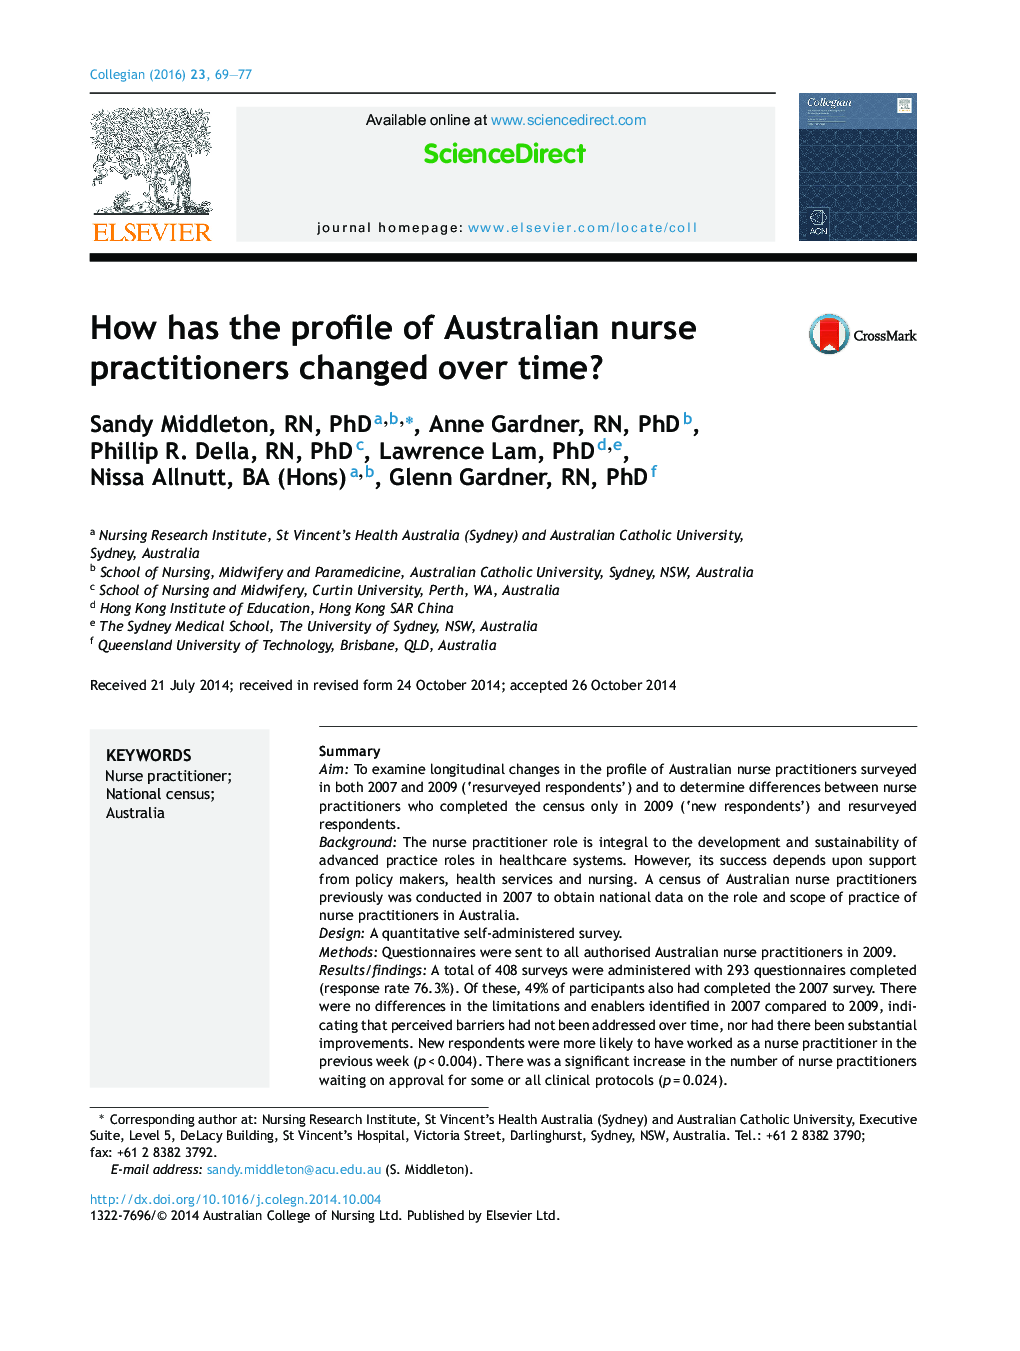 How has the profile of Australian nurse practitioners changed over time?